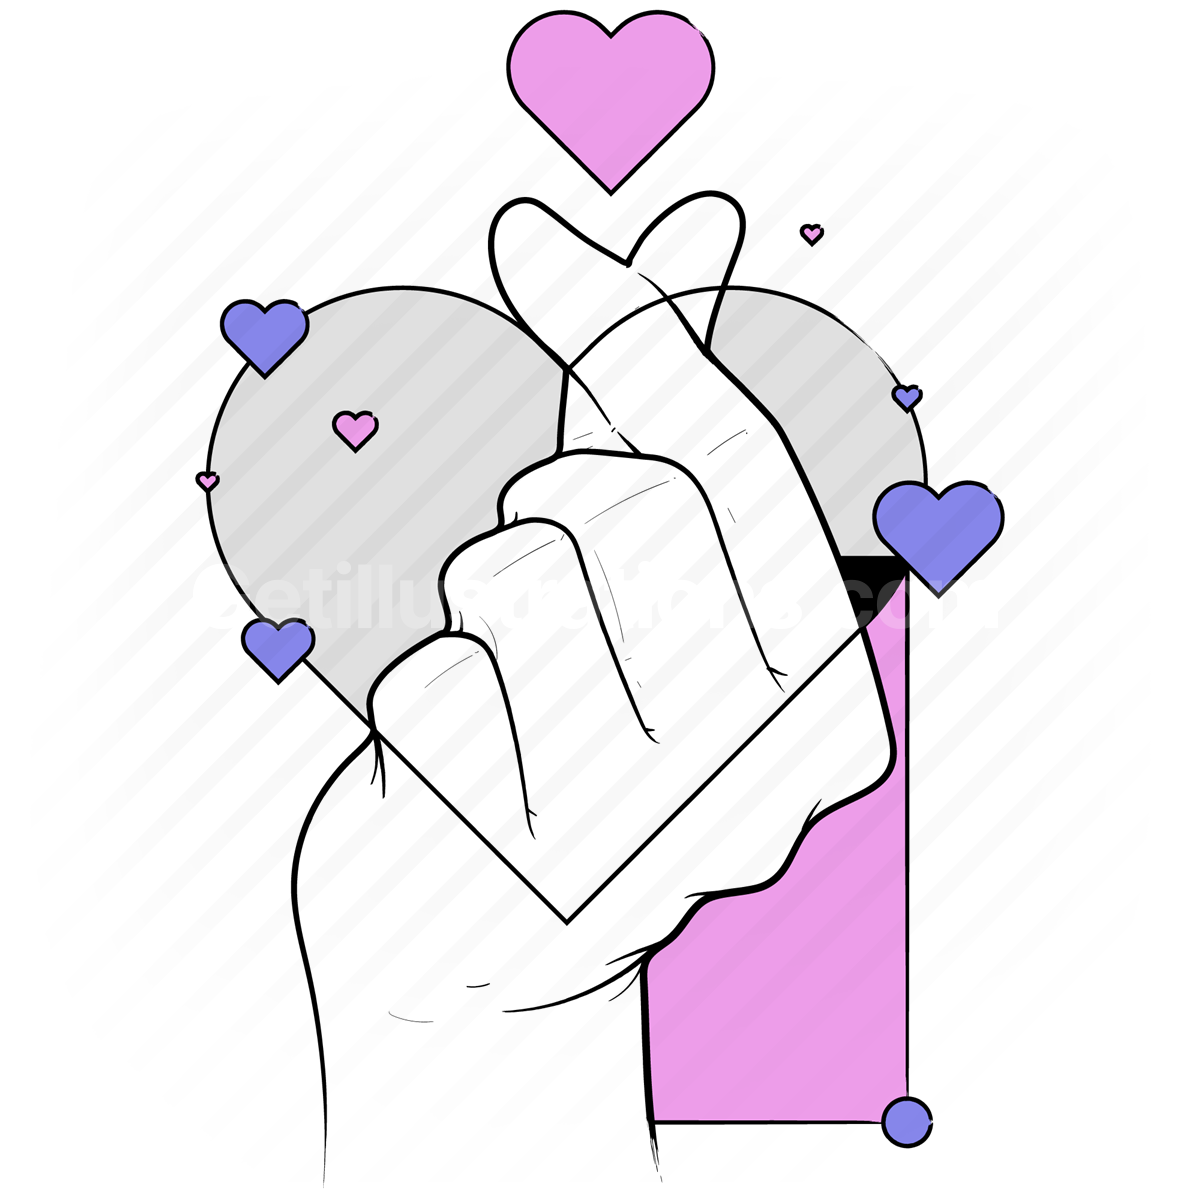 Love Hand Gesture Vector Hd Images, Hand Draw Gesture Of Love Powder, Palm,  Finger, Icon PNG Image For Free Download